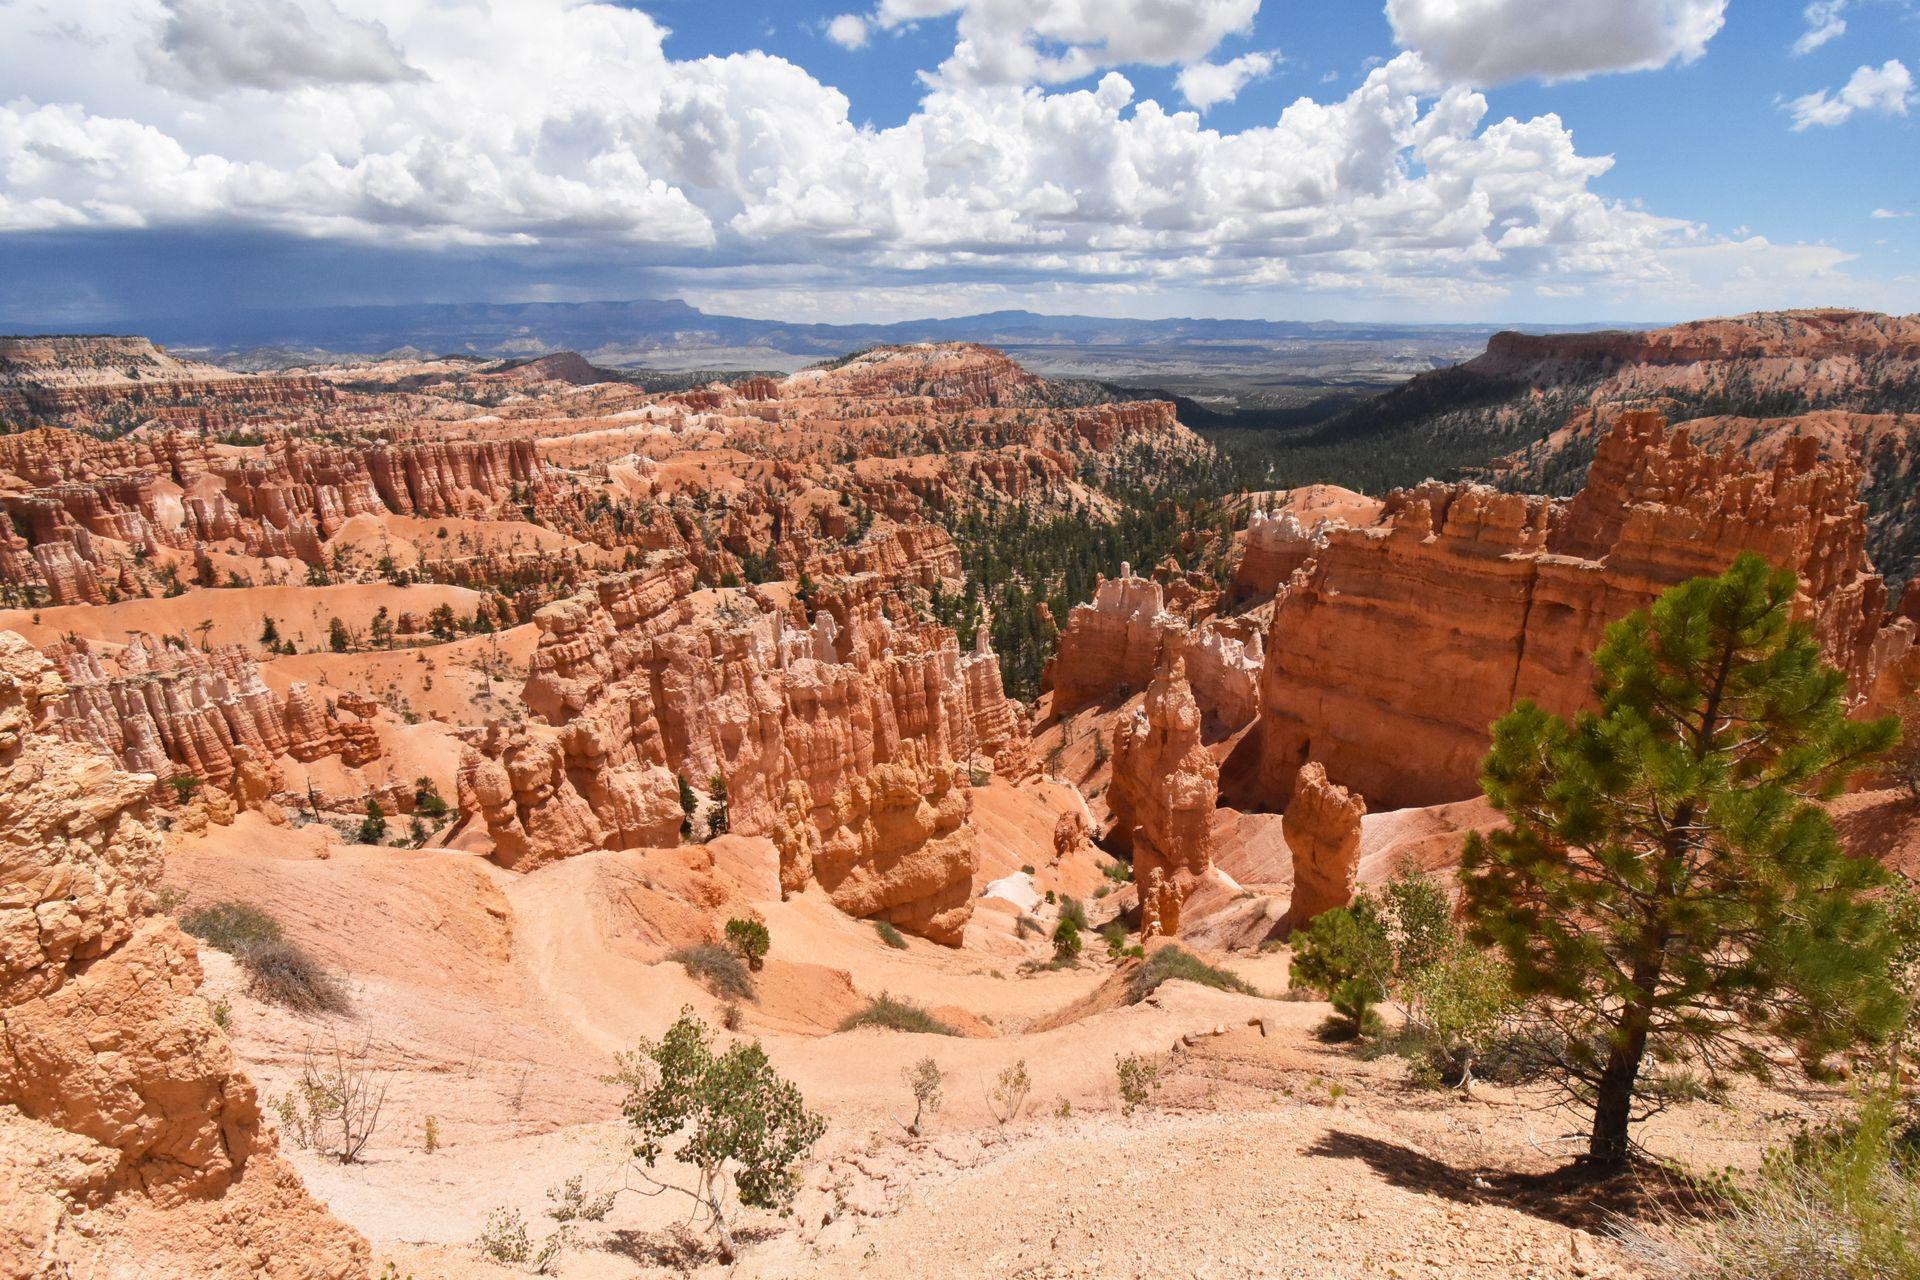 A view of many hoodoos from Sunset Point.